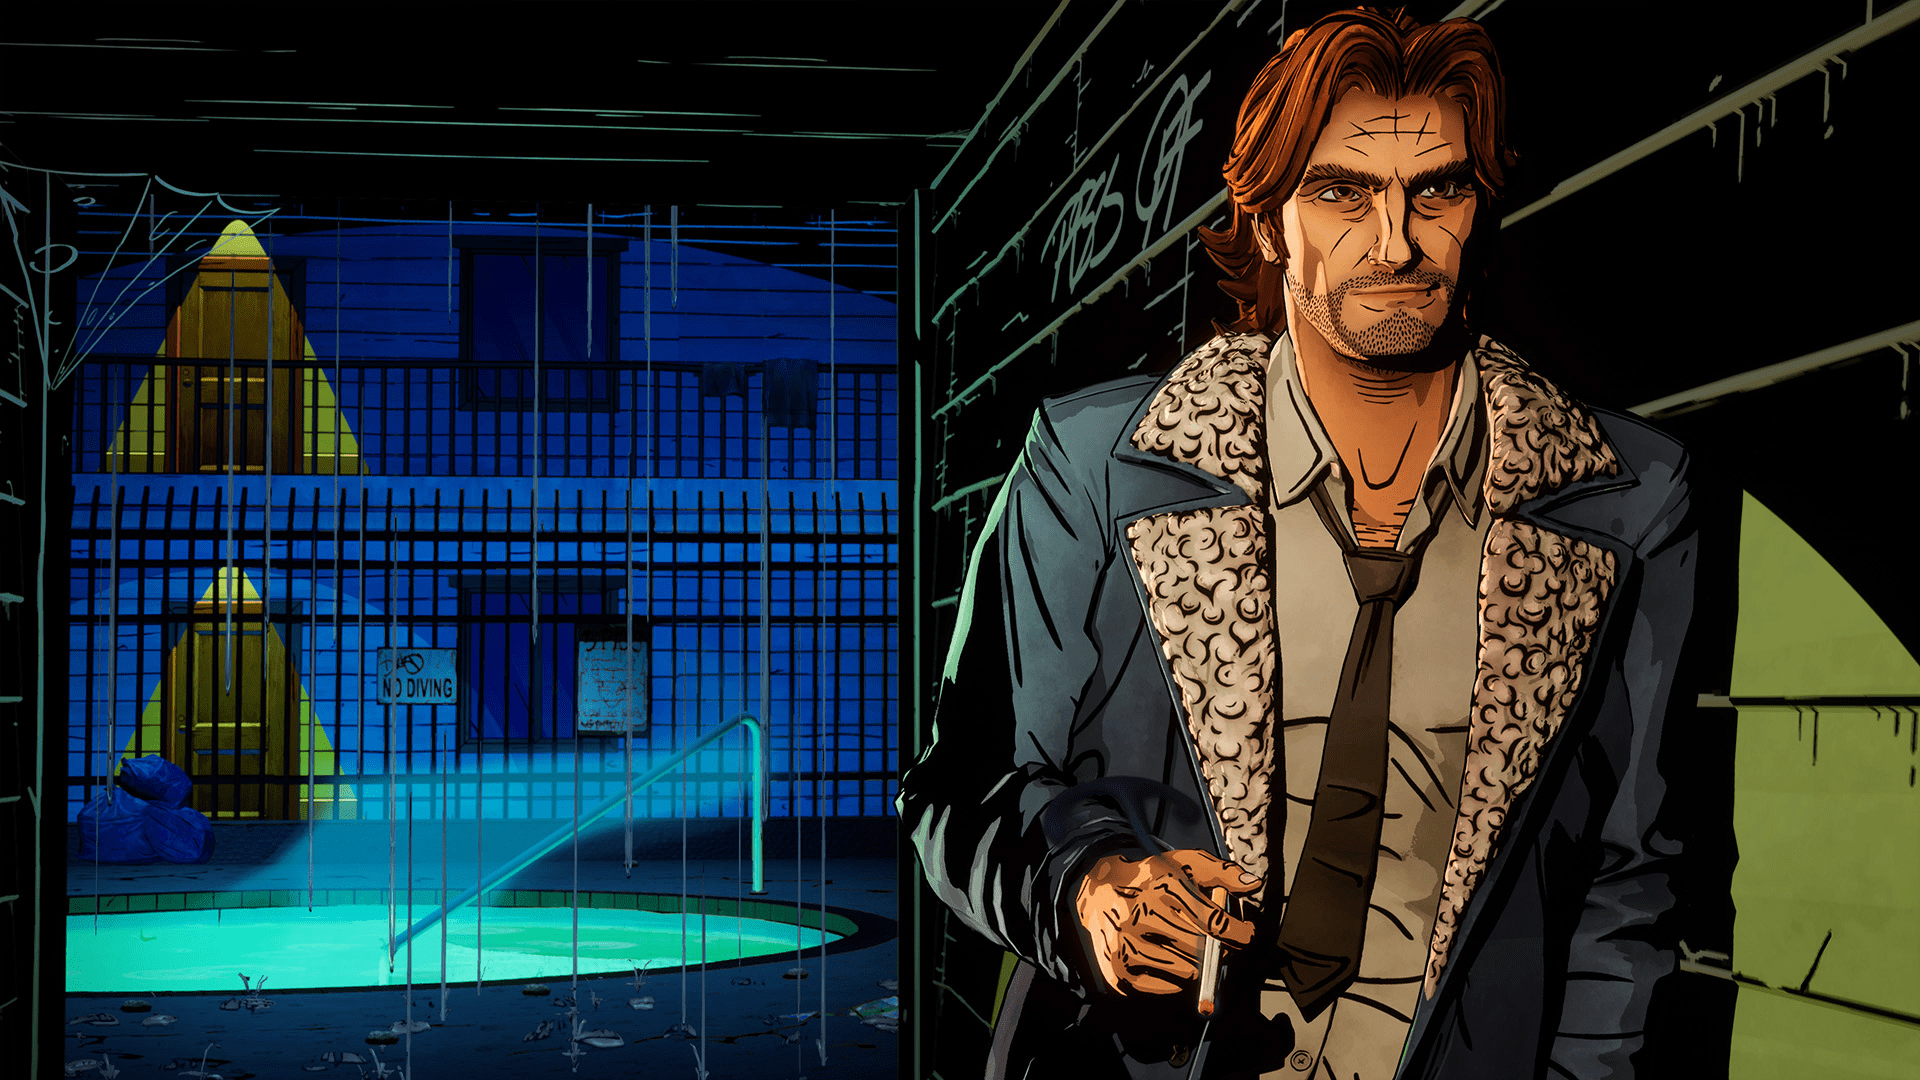 The Wolf Among Us 2 was delayed until 2024 to avoid exhaustion and crisis

End-shutdown